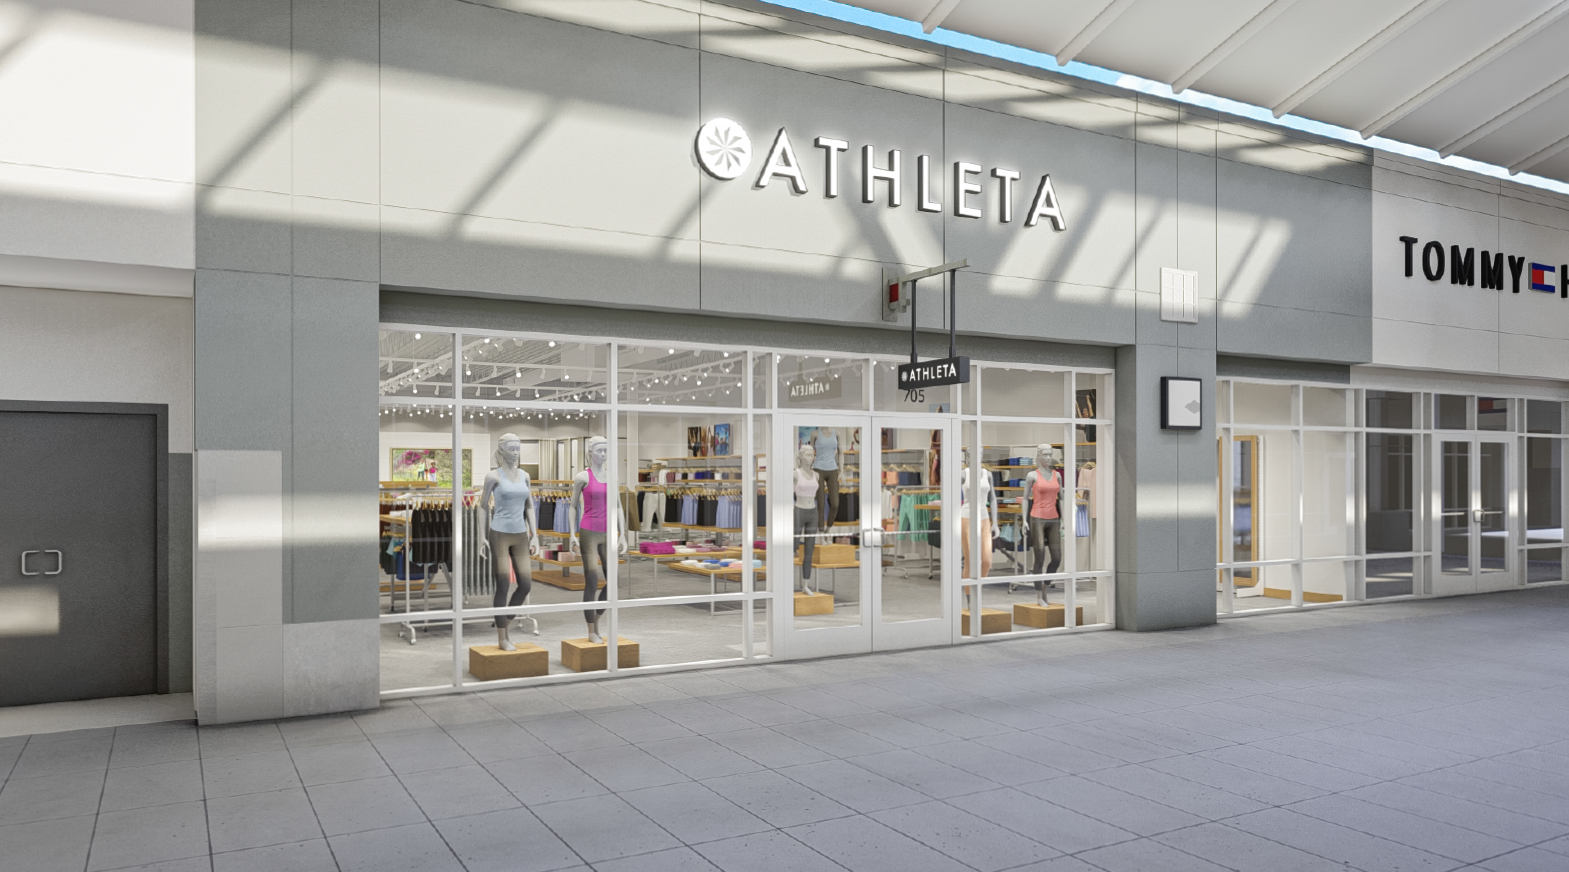 Gap's Athleta Plans Two New Outlet Stores